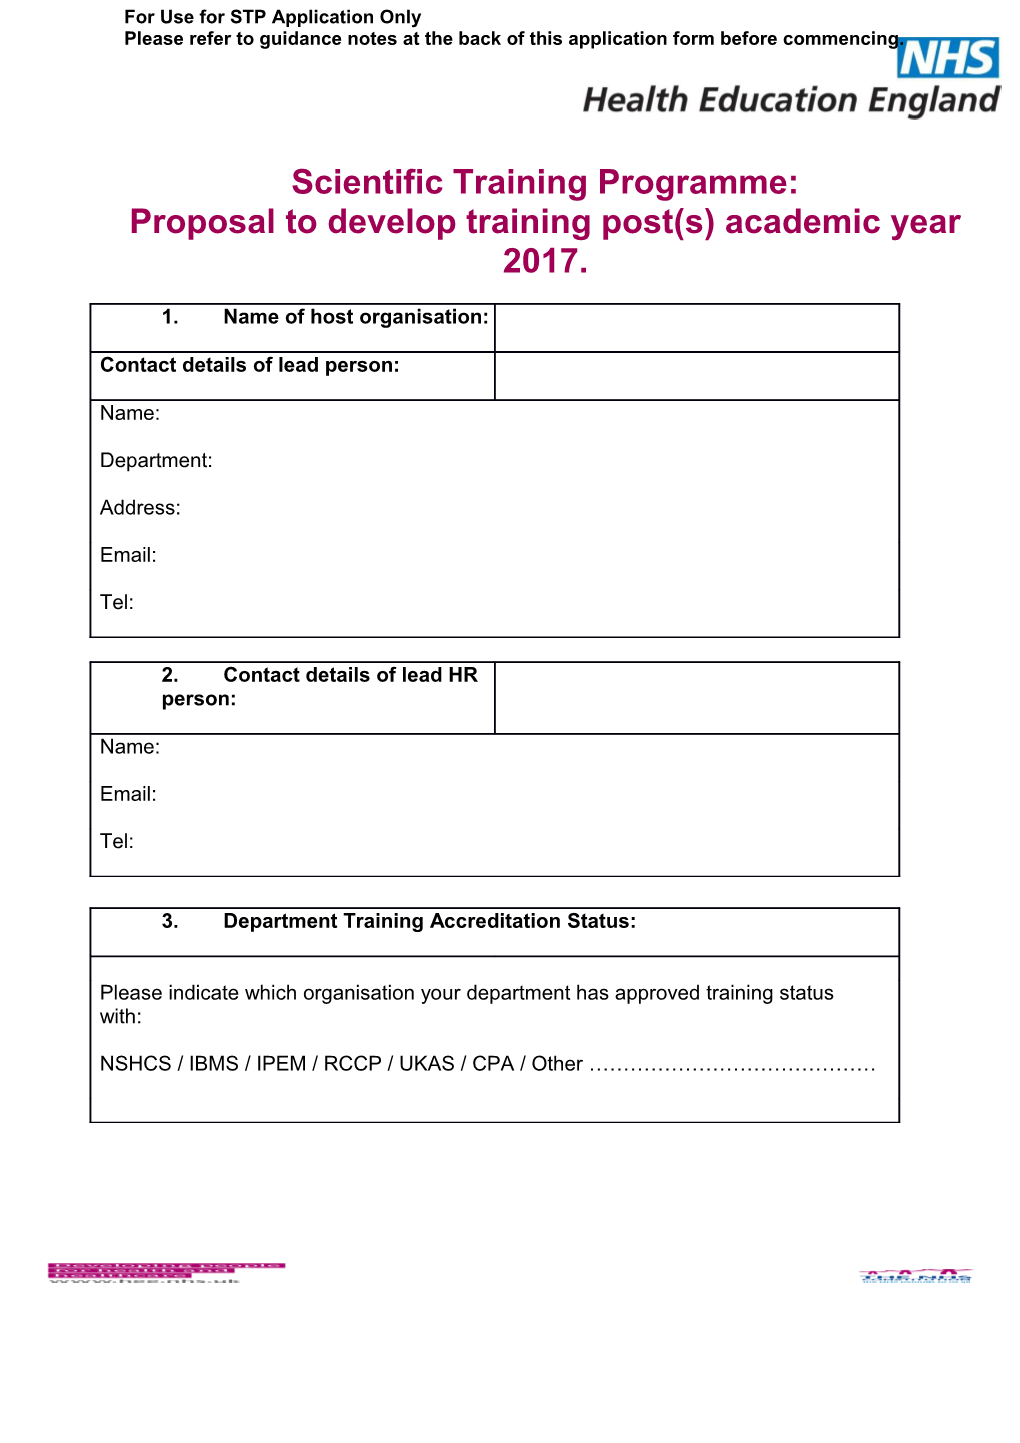 Proposal to Develop Training Post(S) Academic Year 2017